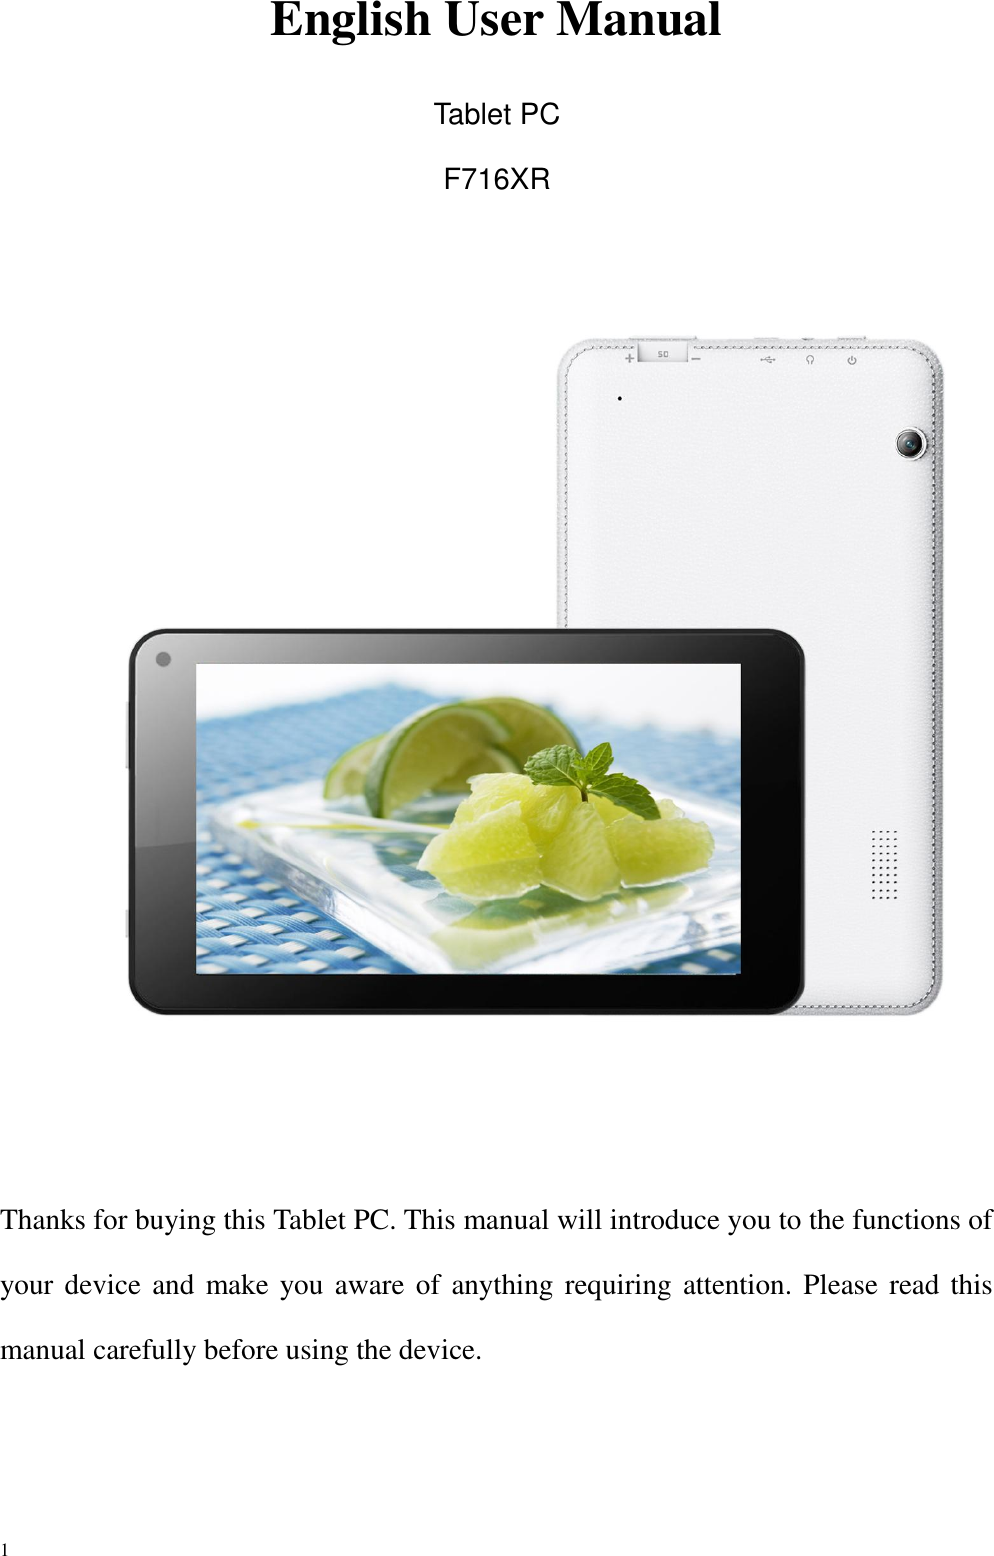 1    English User Manual  Tablet PC F716XR       Thanks for buying this Tablet PC. This manual will introduce you to the functions of your device and make you aware of anything requiring attention. Please read this manual carefully before using the device. 